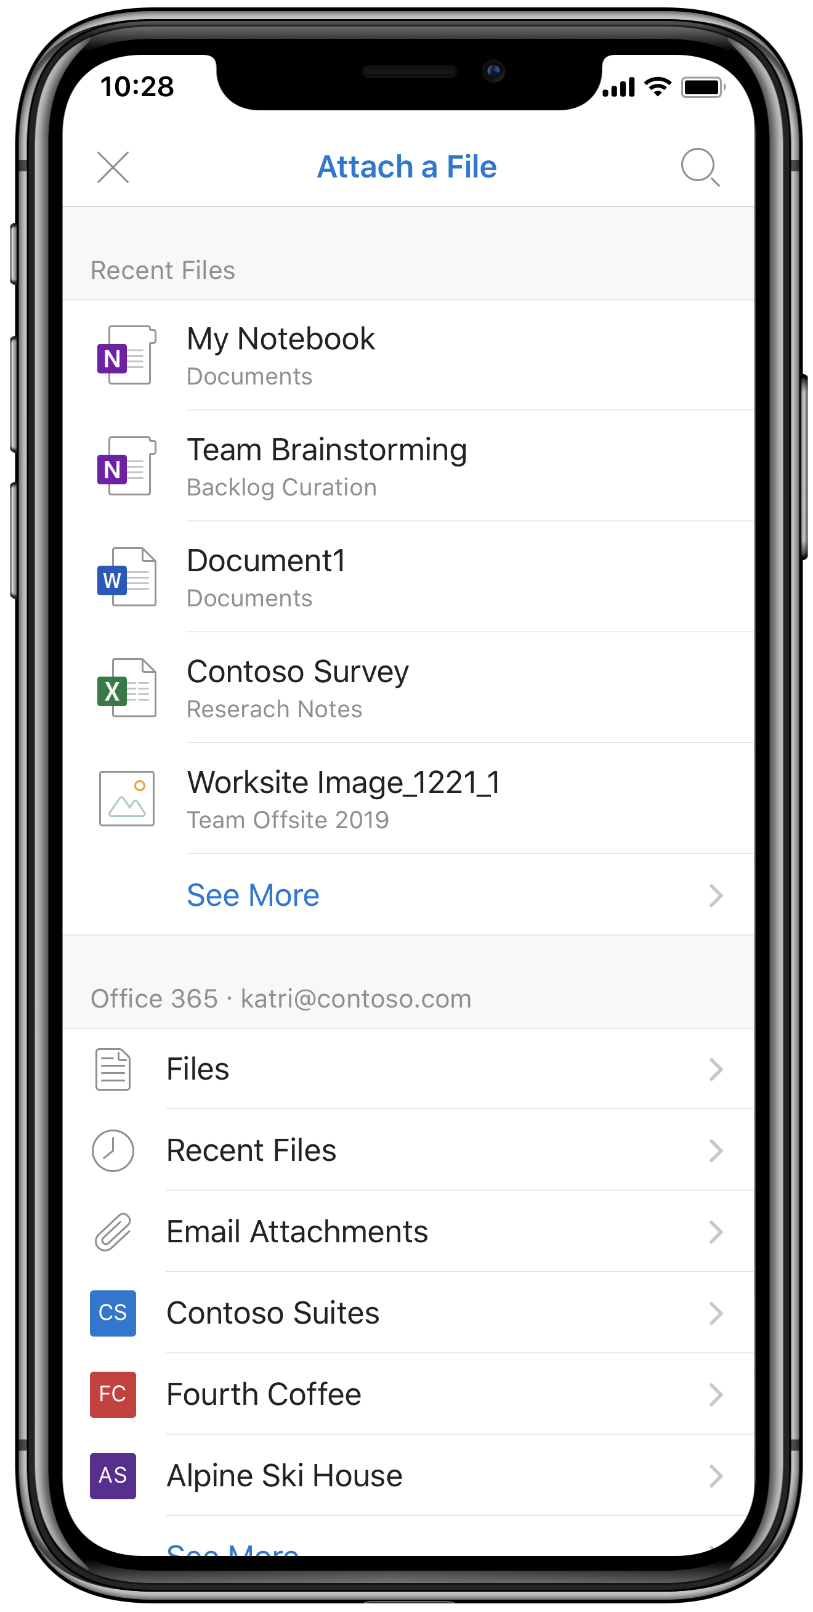 Screenshot of files being attached in Outlook for iOS.